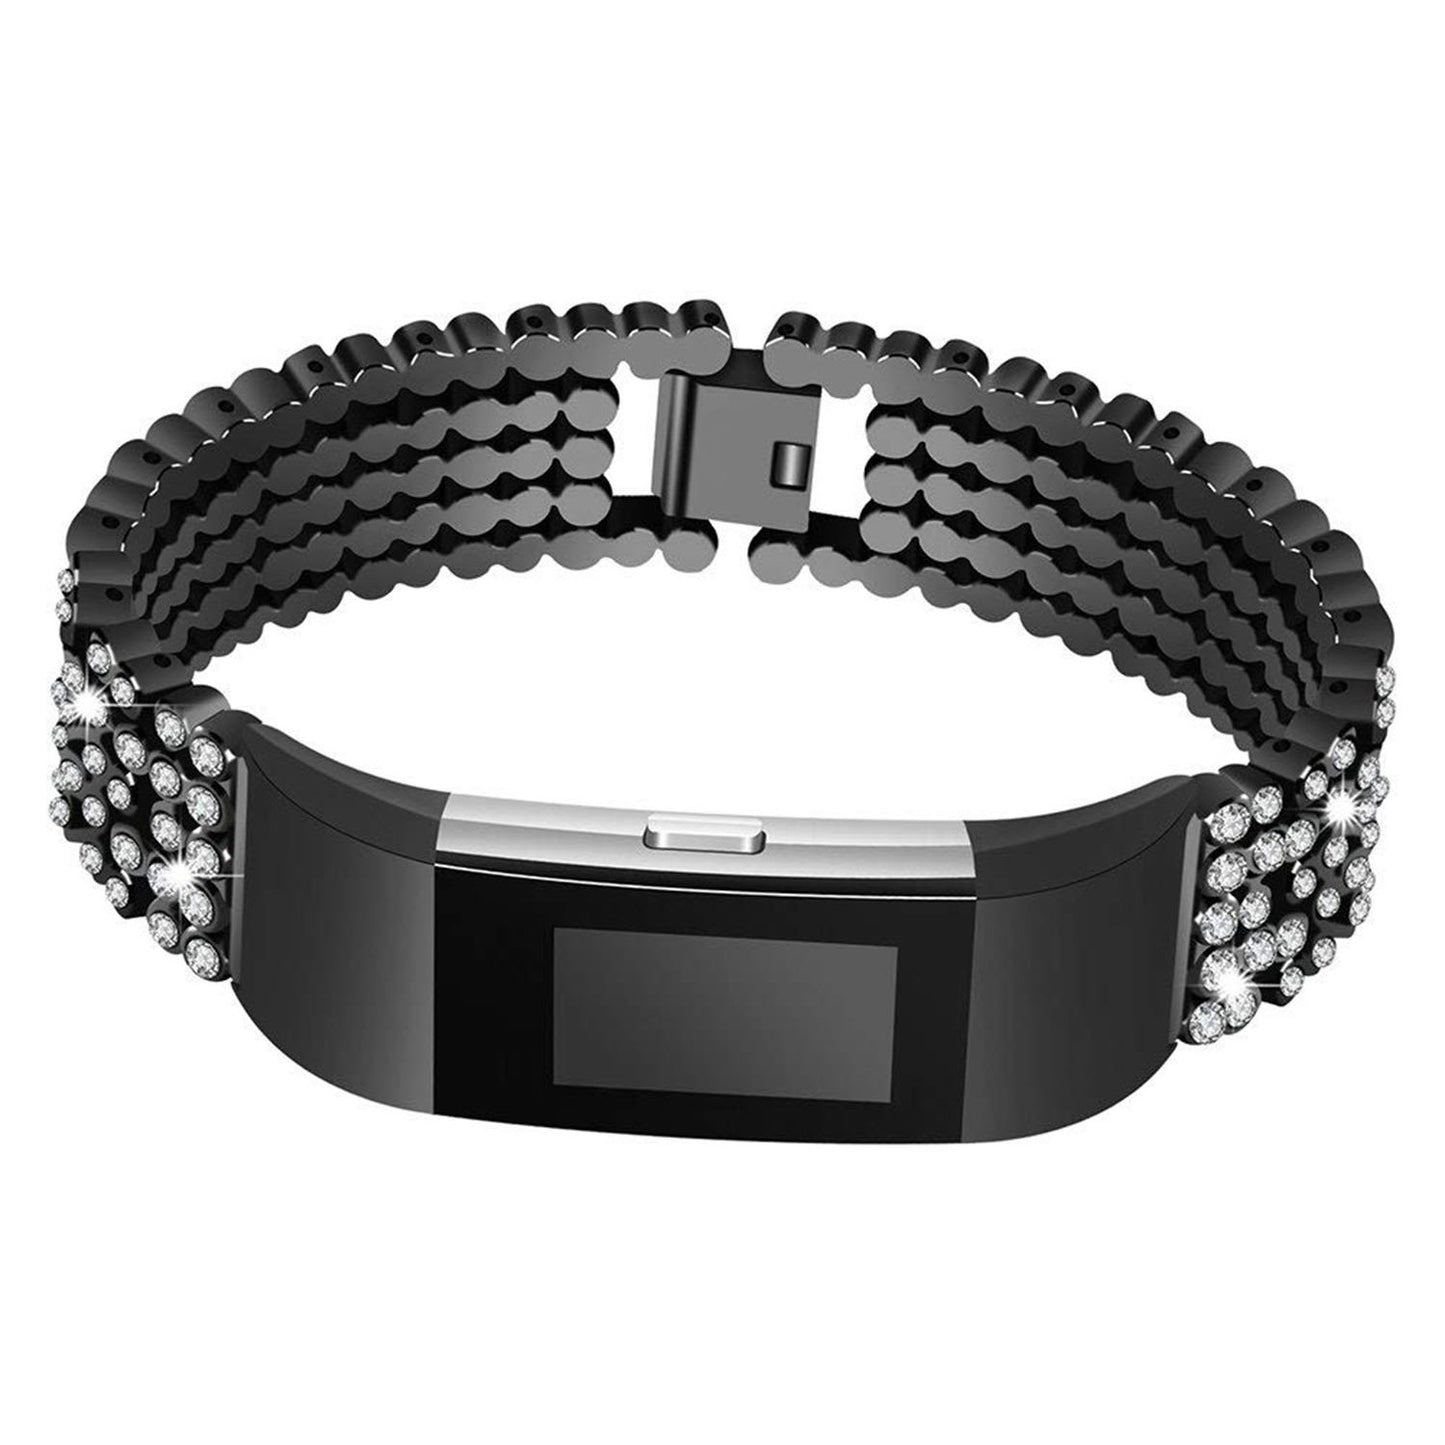 Metal Rhinestone Band for Fitbit Charge 2